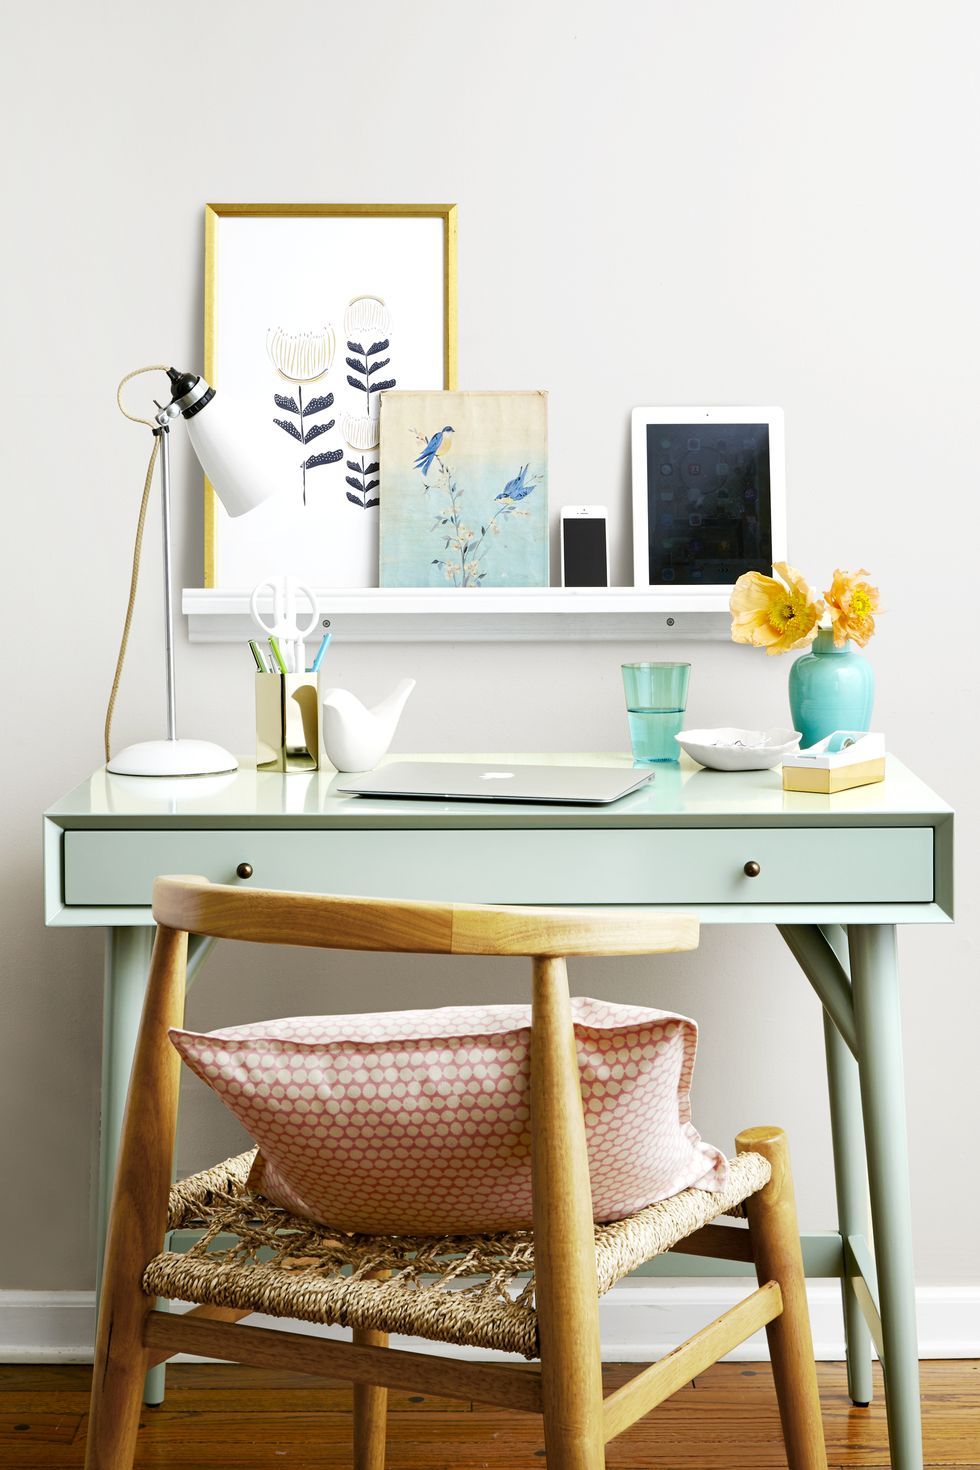 10 Cute Desk Decor Ideas For The Ultimate Work Space - Society19